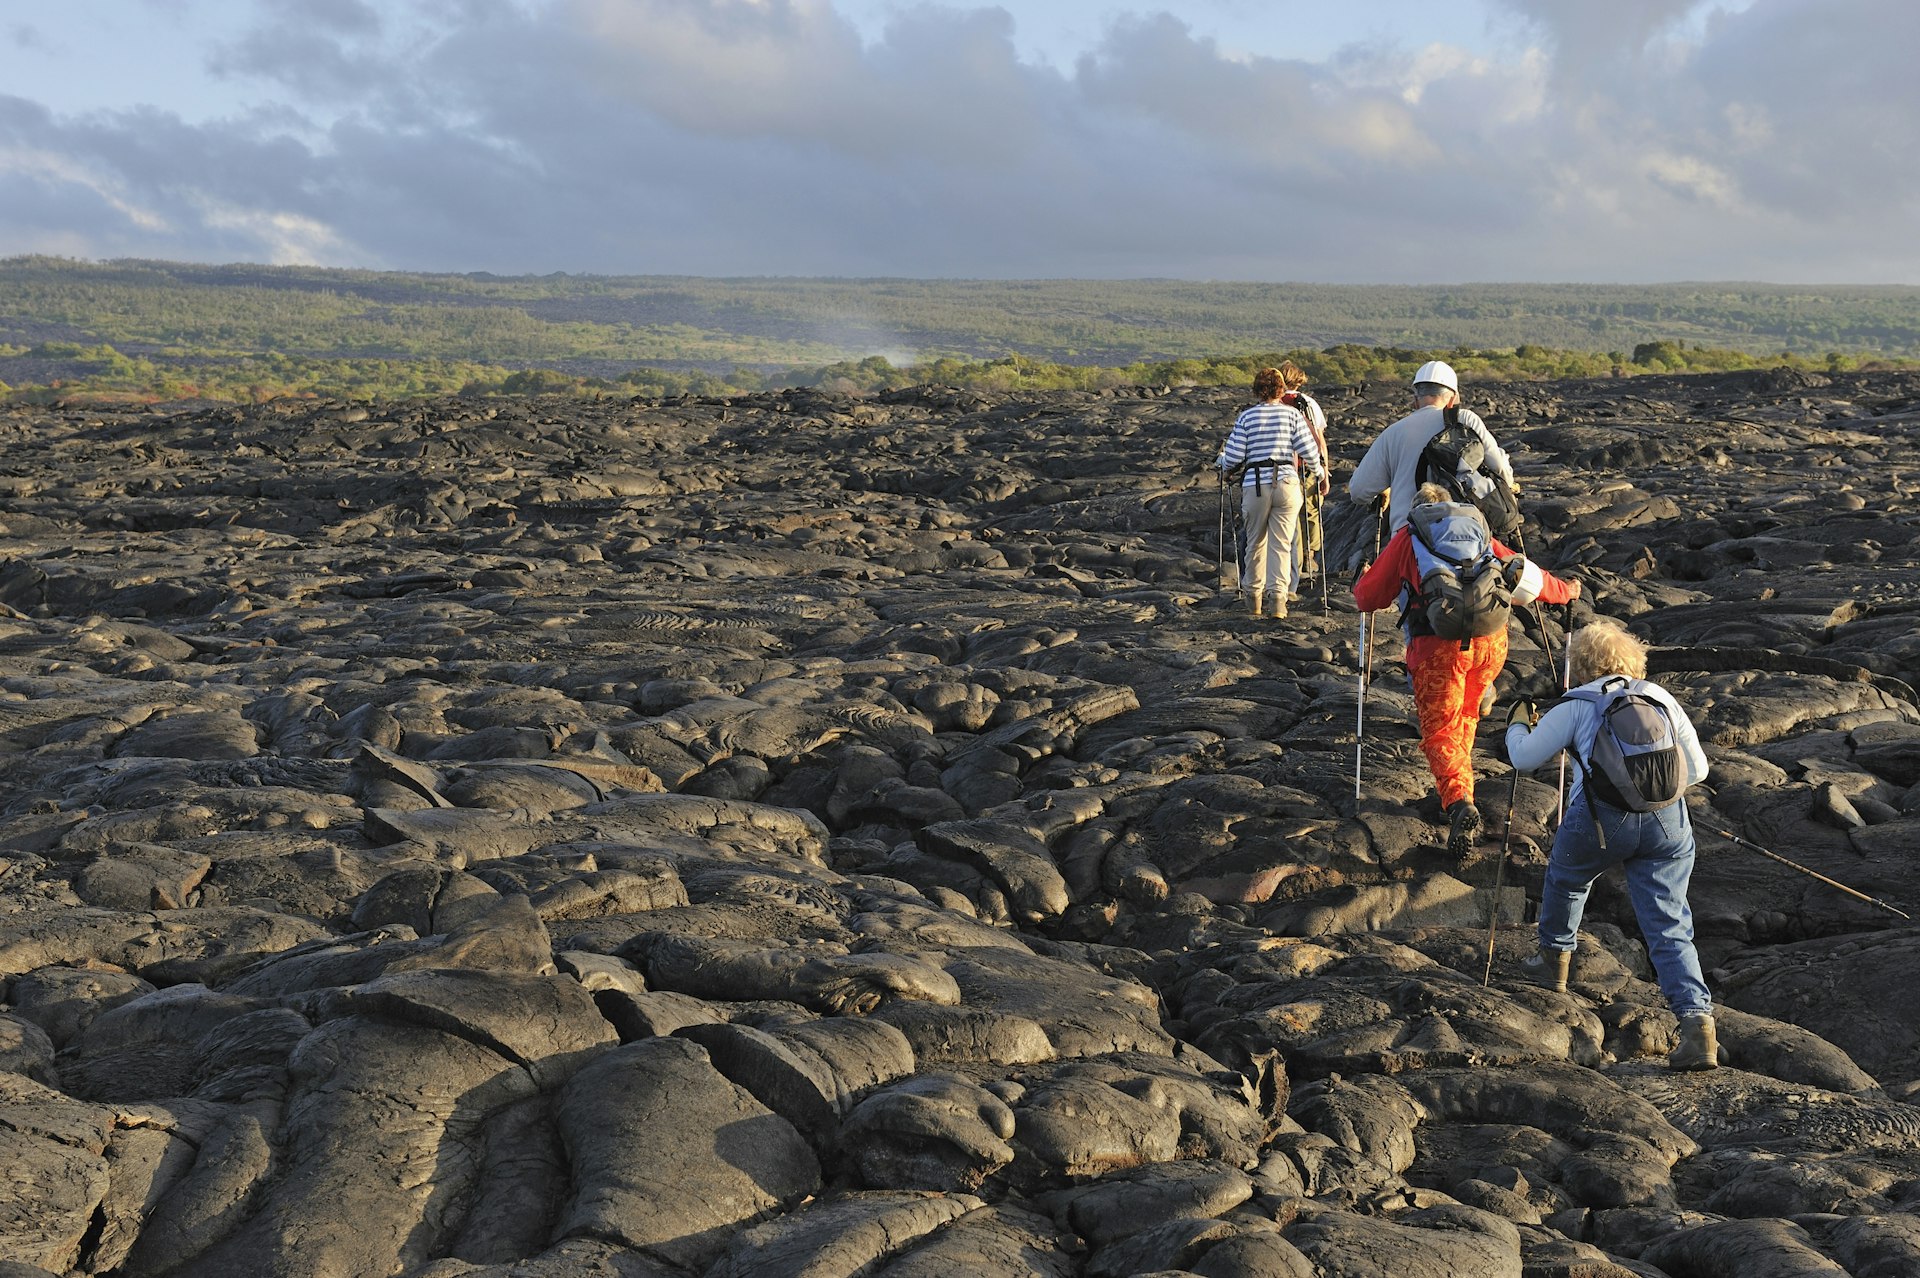 A group of hikers head out over a black lava landscape